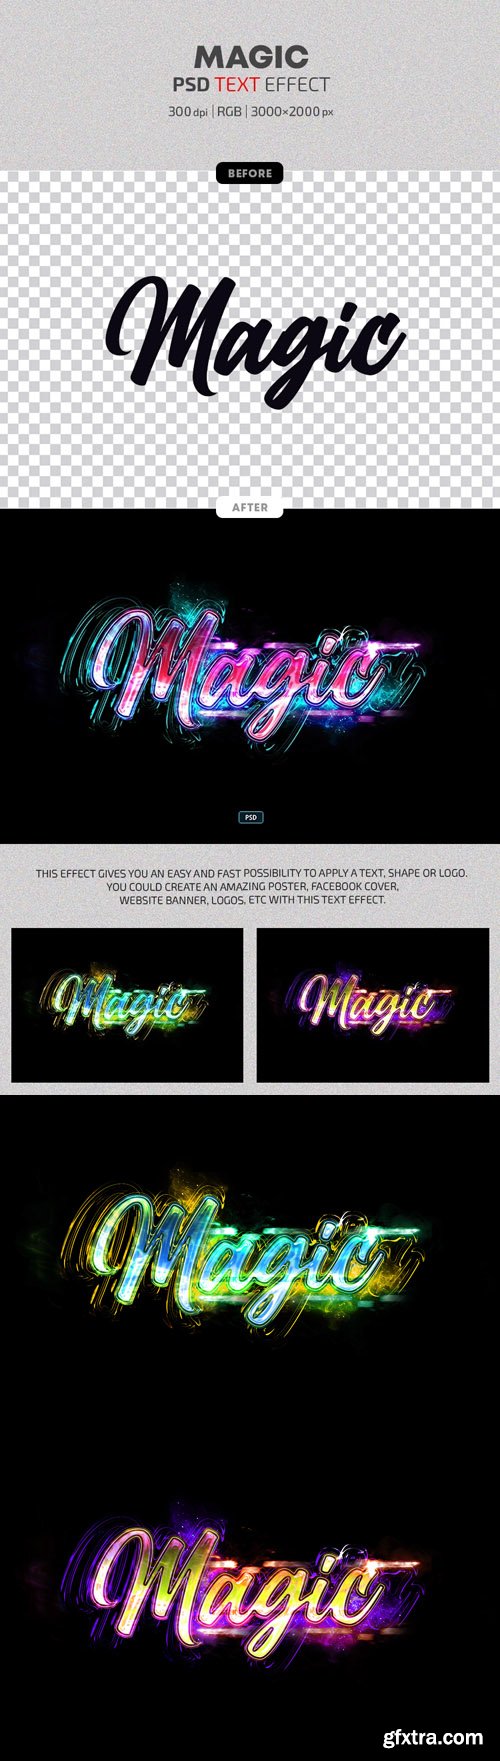 Magic - Photoshop Text Effects